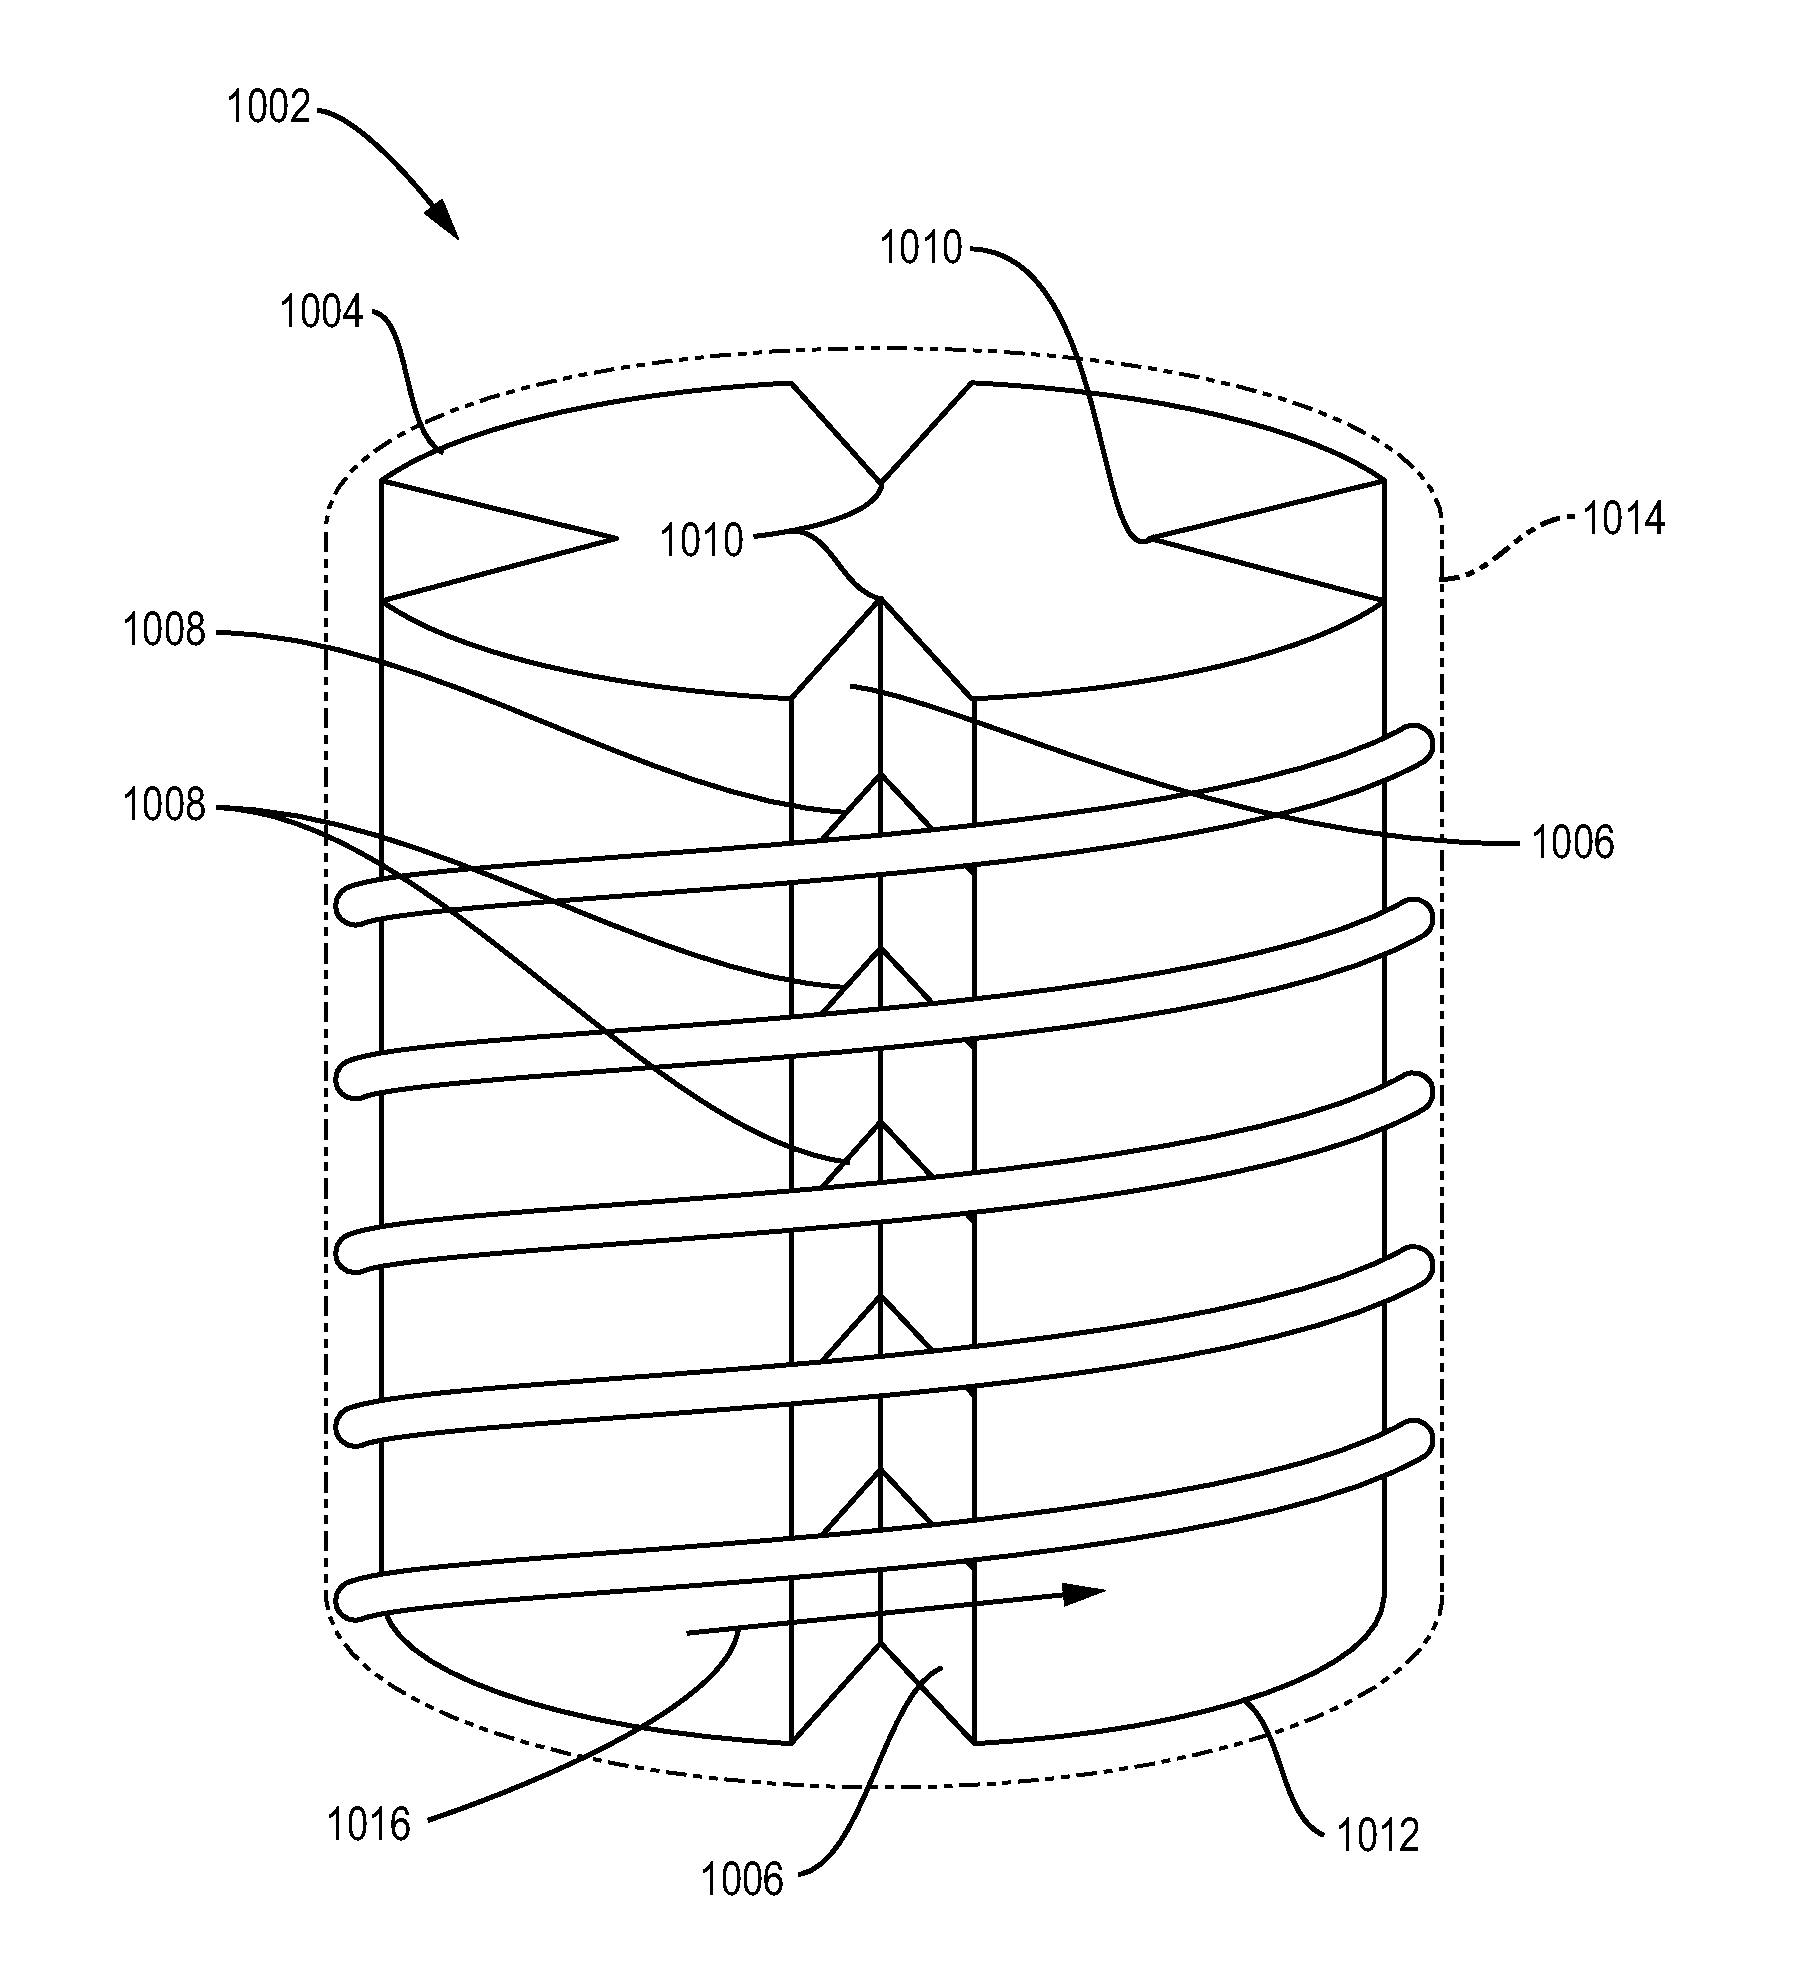 Temperature controlling surfaces and support structures